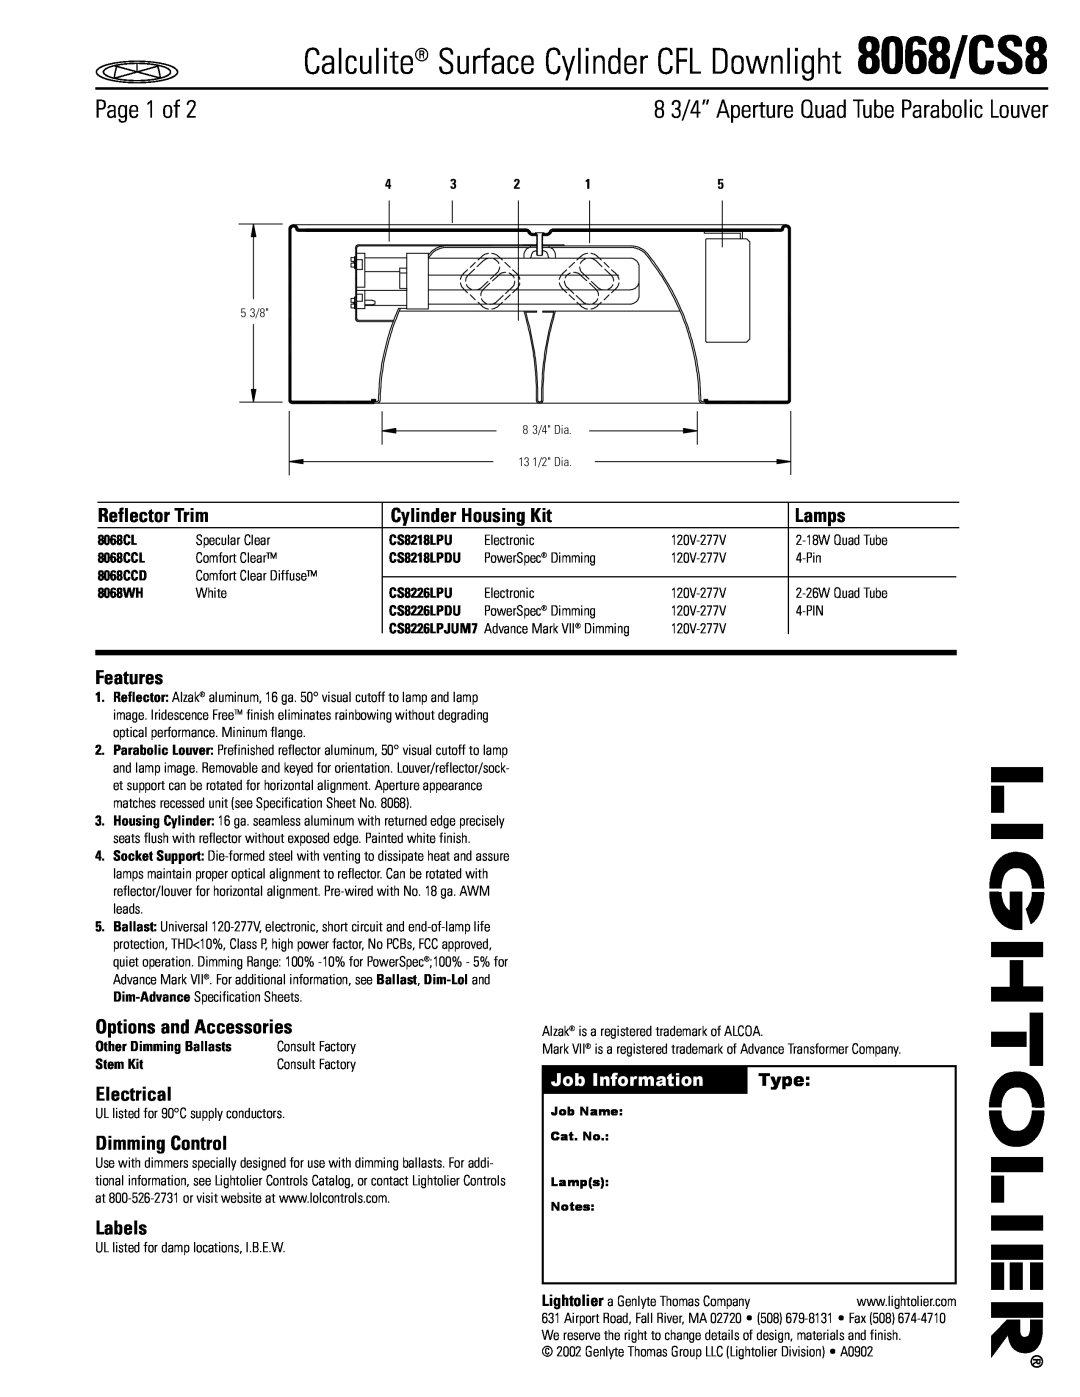 Lightolier 8068-CS8 specifications Calculite Surface Cylinder CFL Downlight 8068/CS8, Job Information, Type, Page 1 of 